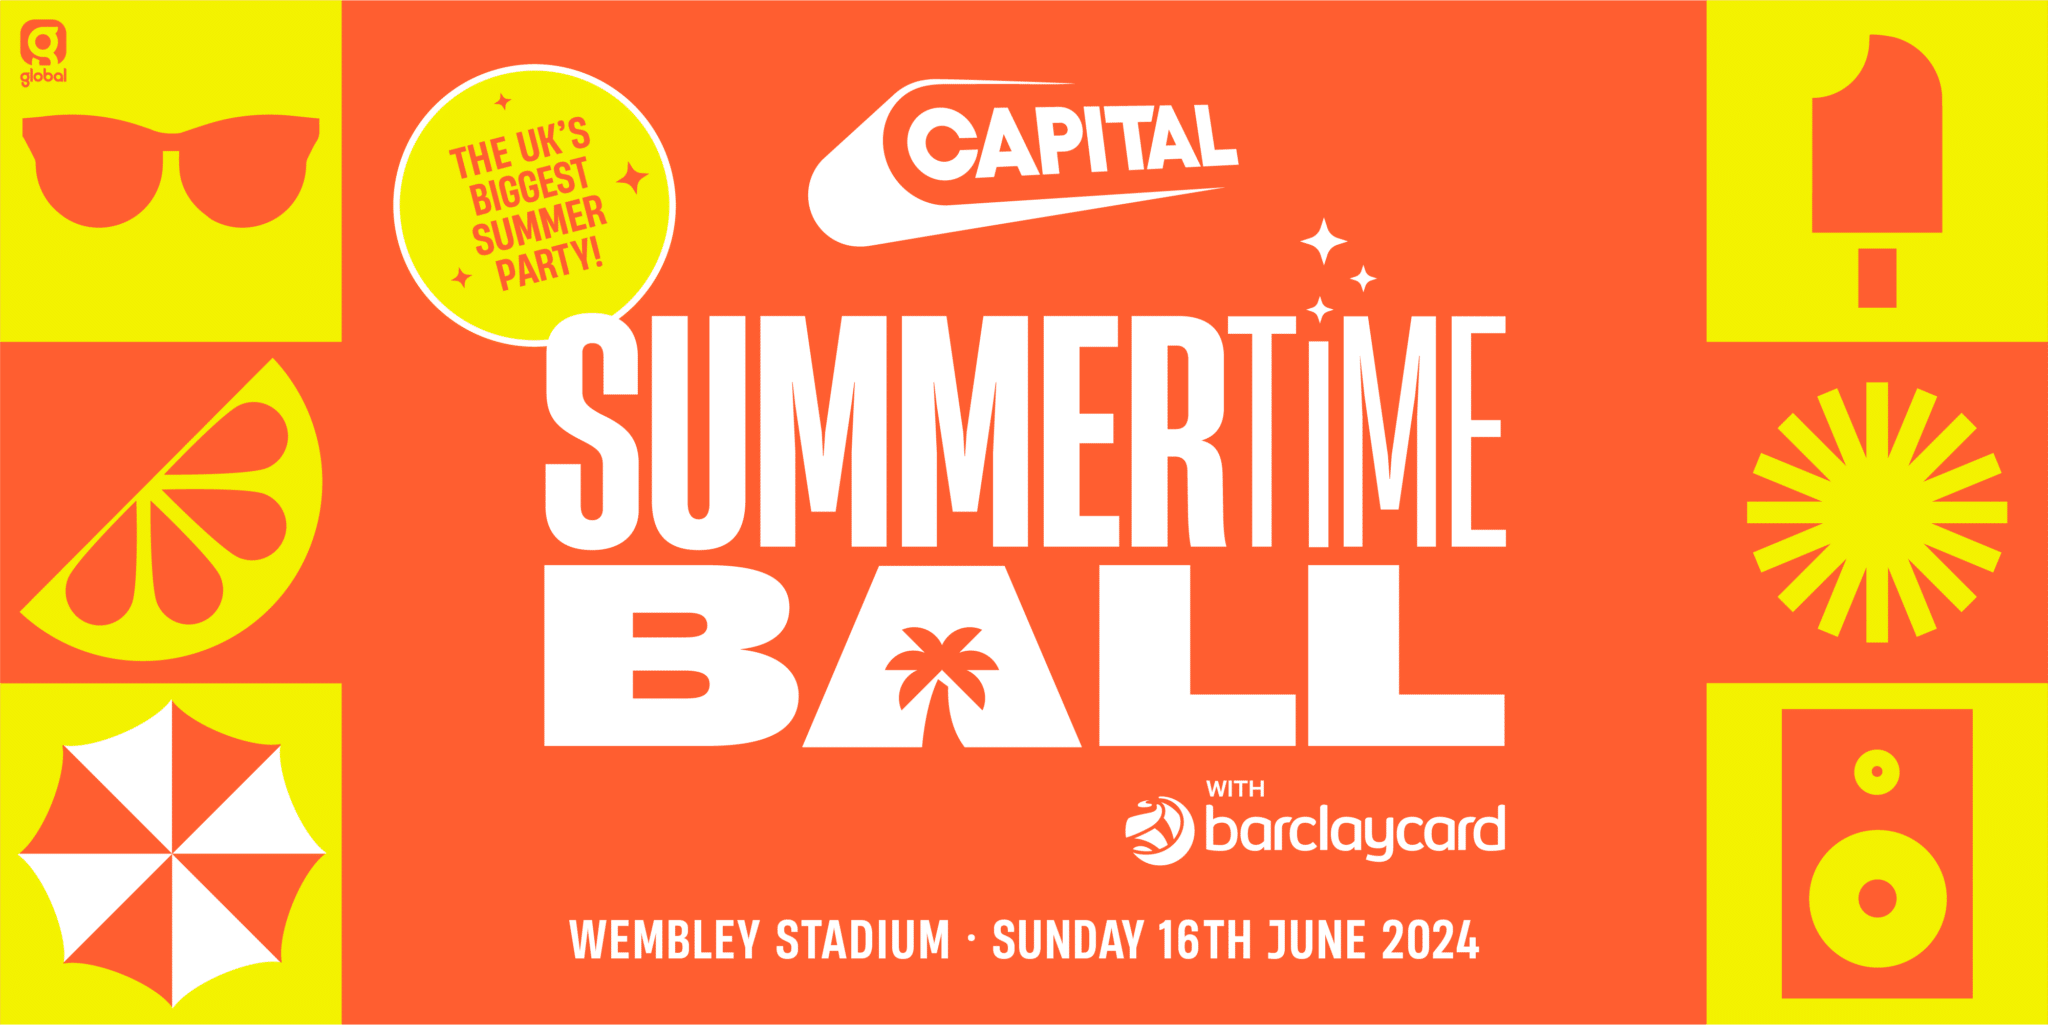 Capital’s Summertime Ball  with Barclaycard is bac